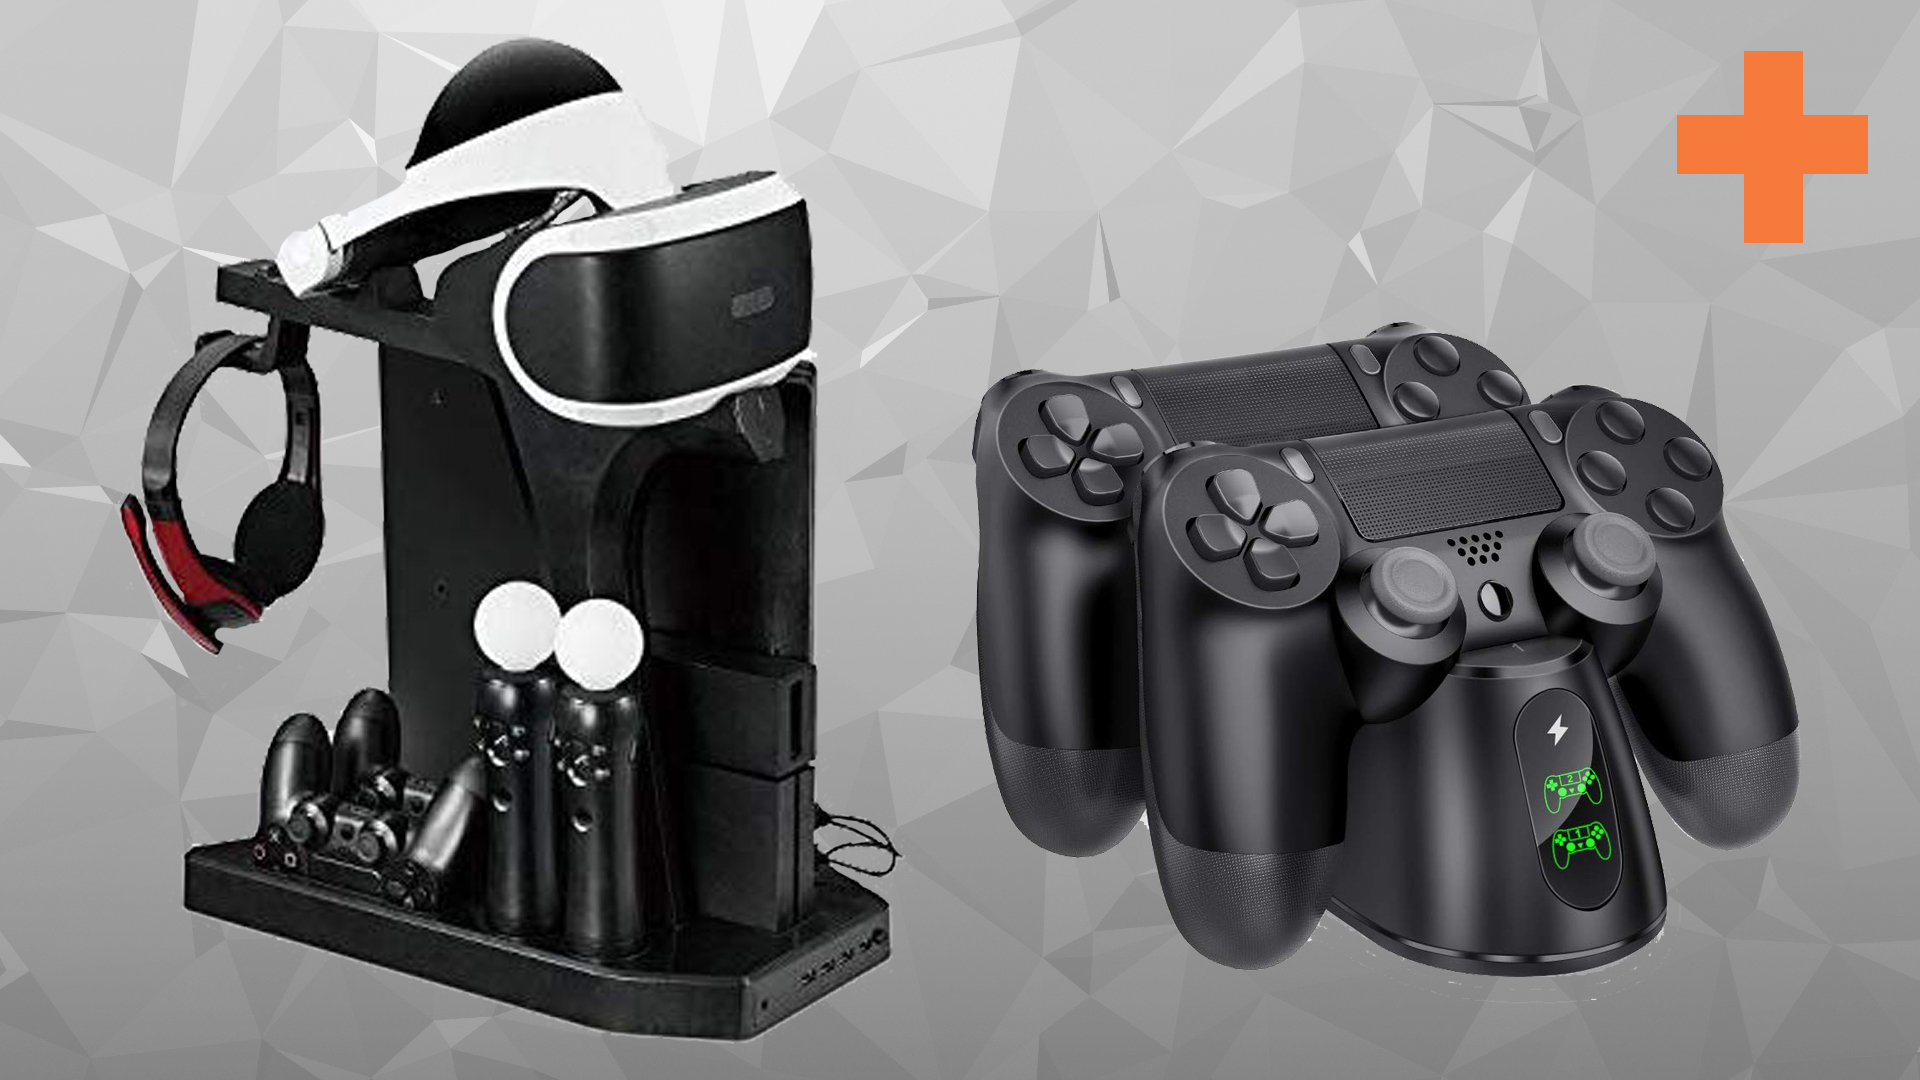 ps4 motion controller charging dock